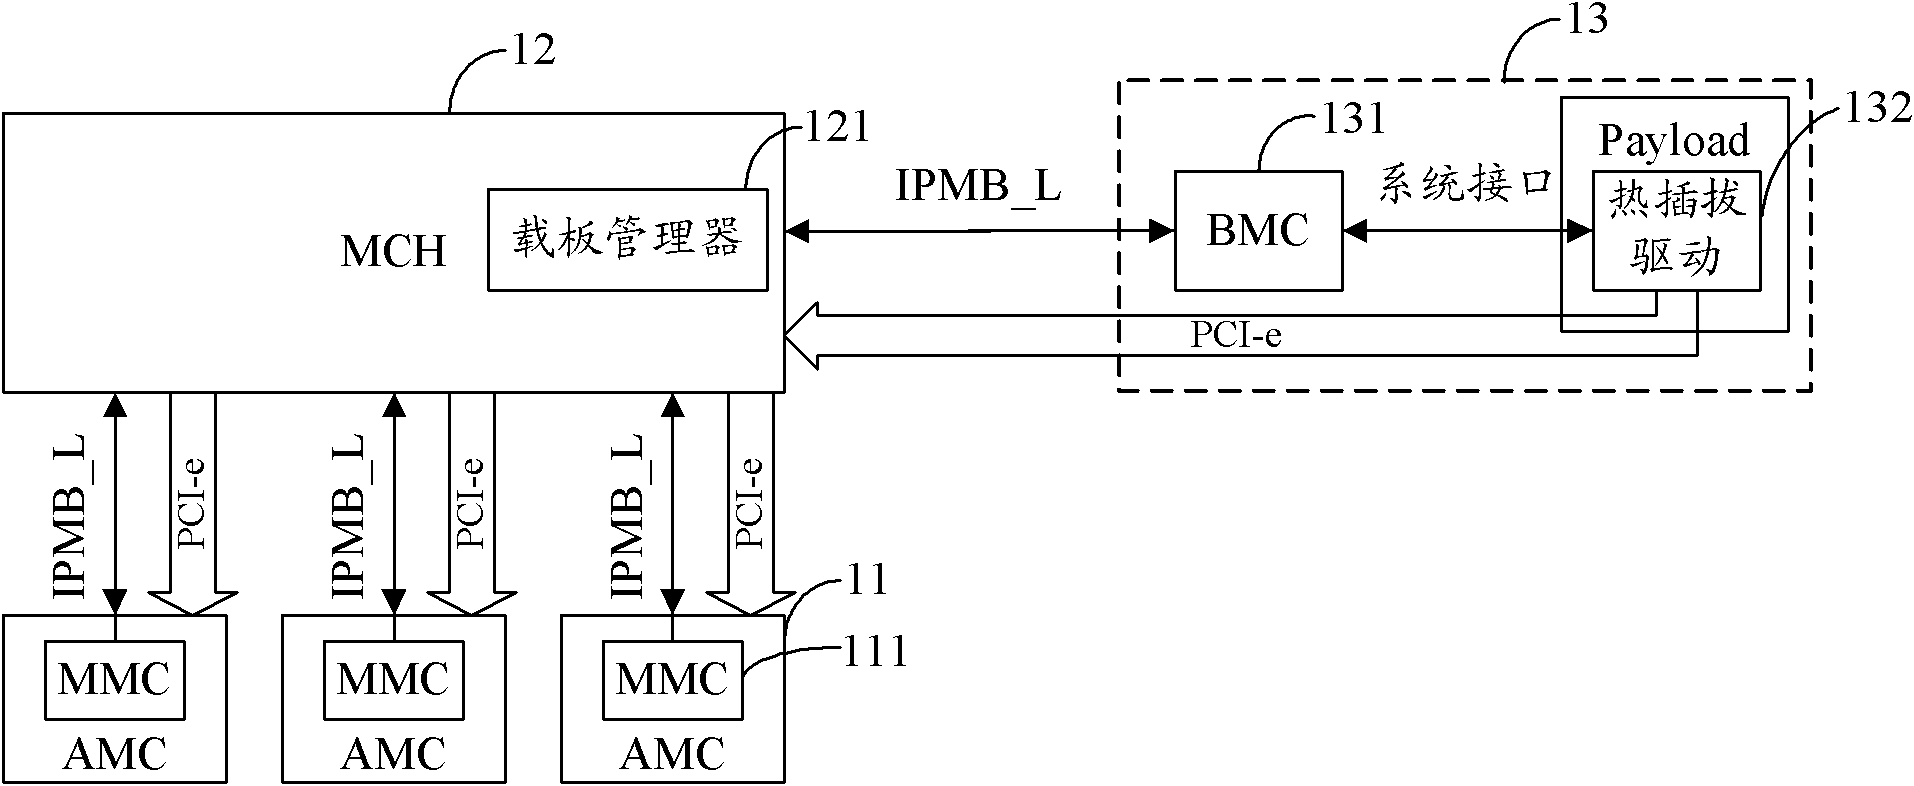 Hot swapping method based on multiple terminal communication adapter (MTCA) platform and multiple terminal communication adapter (MTCA) platform